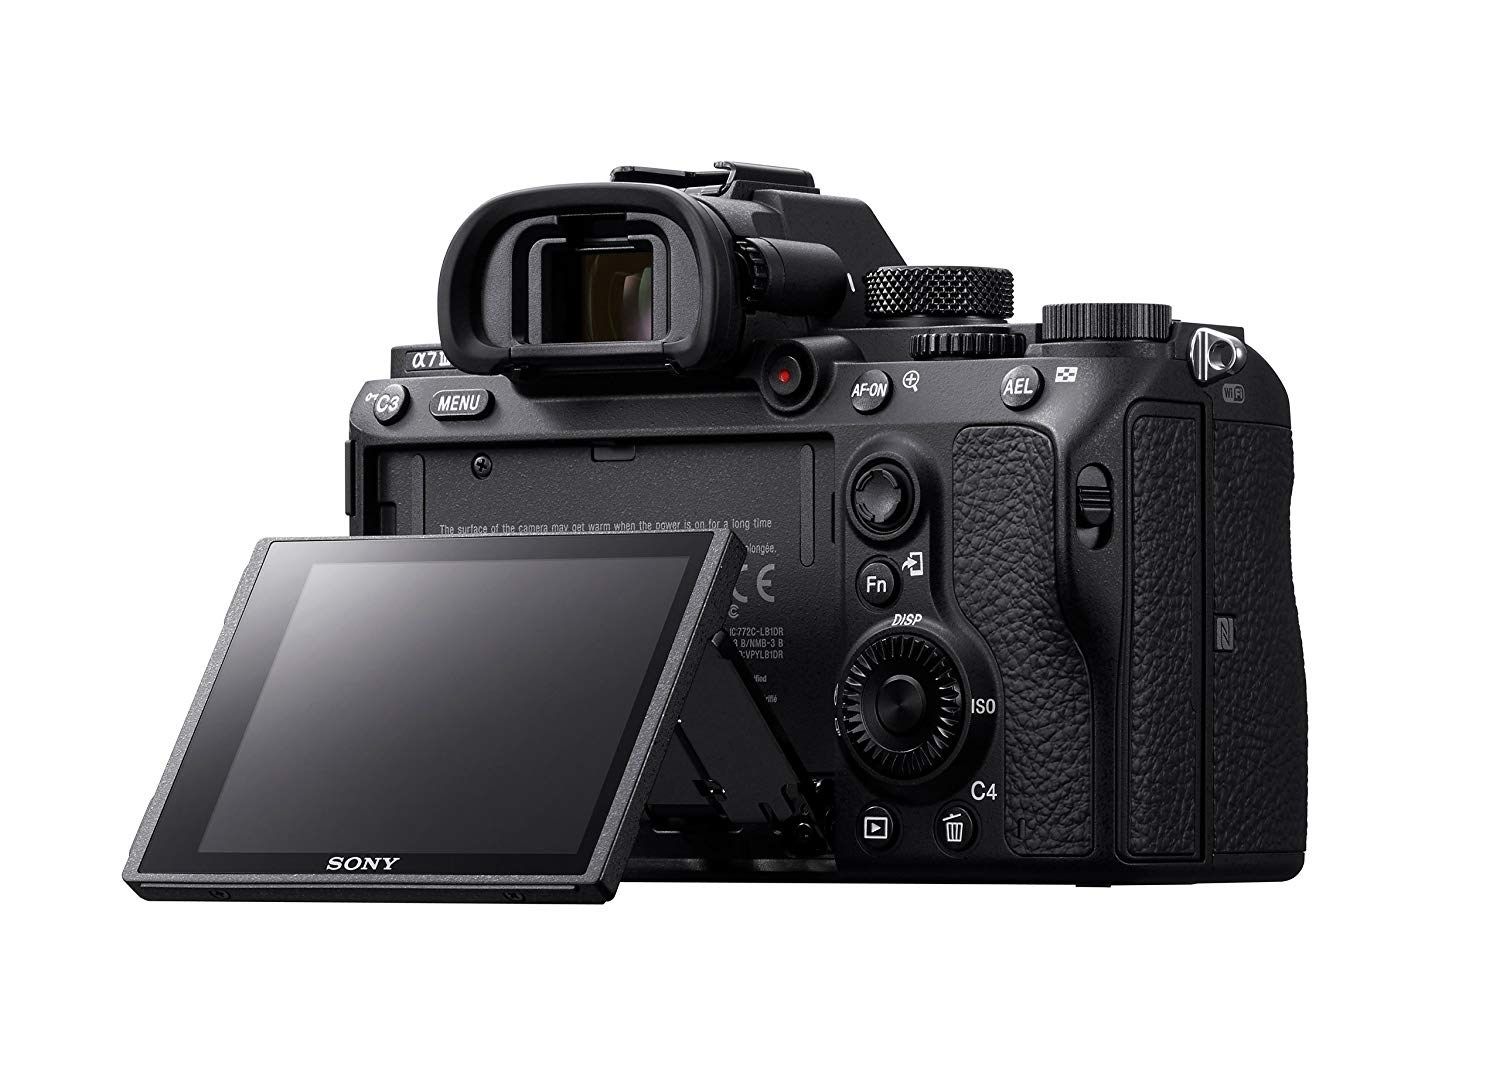 Sony Alpha a7 III Mirrorless Camera - Body only - Product Photo 5 - Screen rotation mechanism example